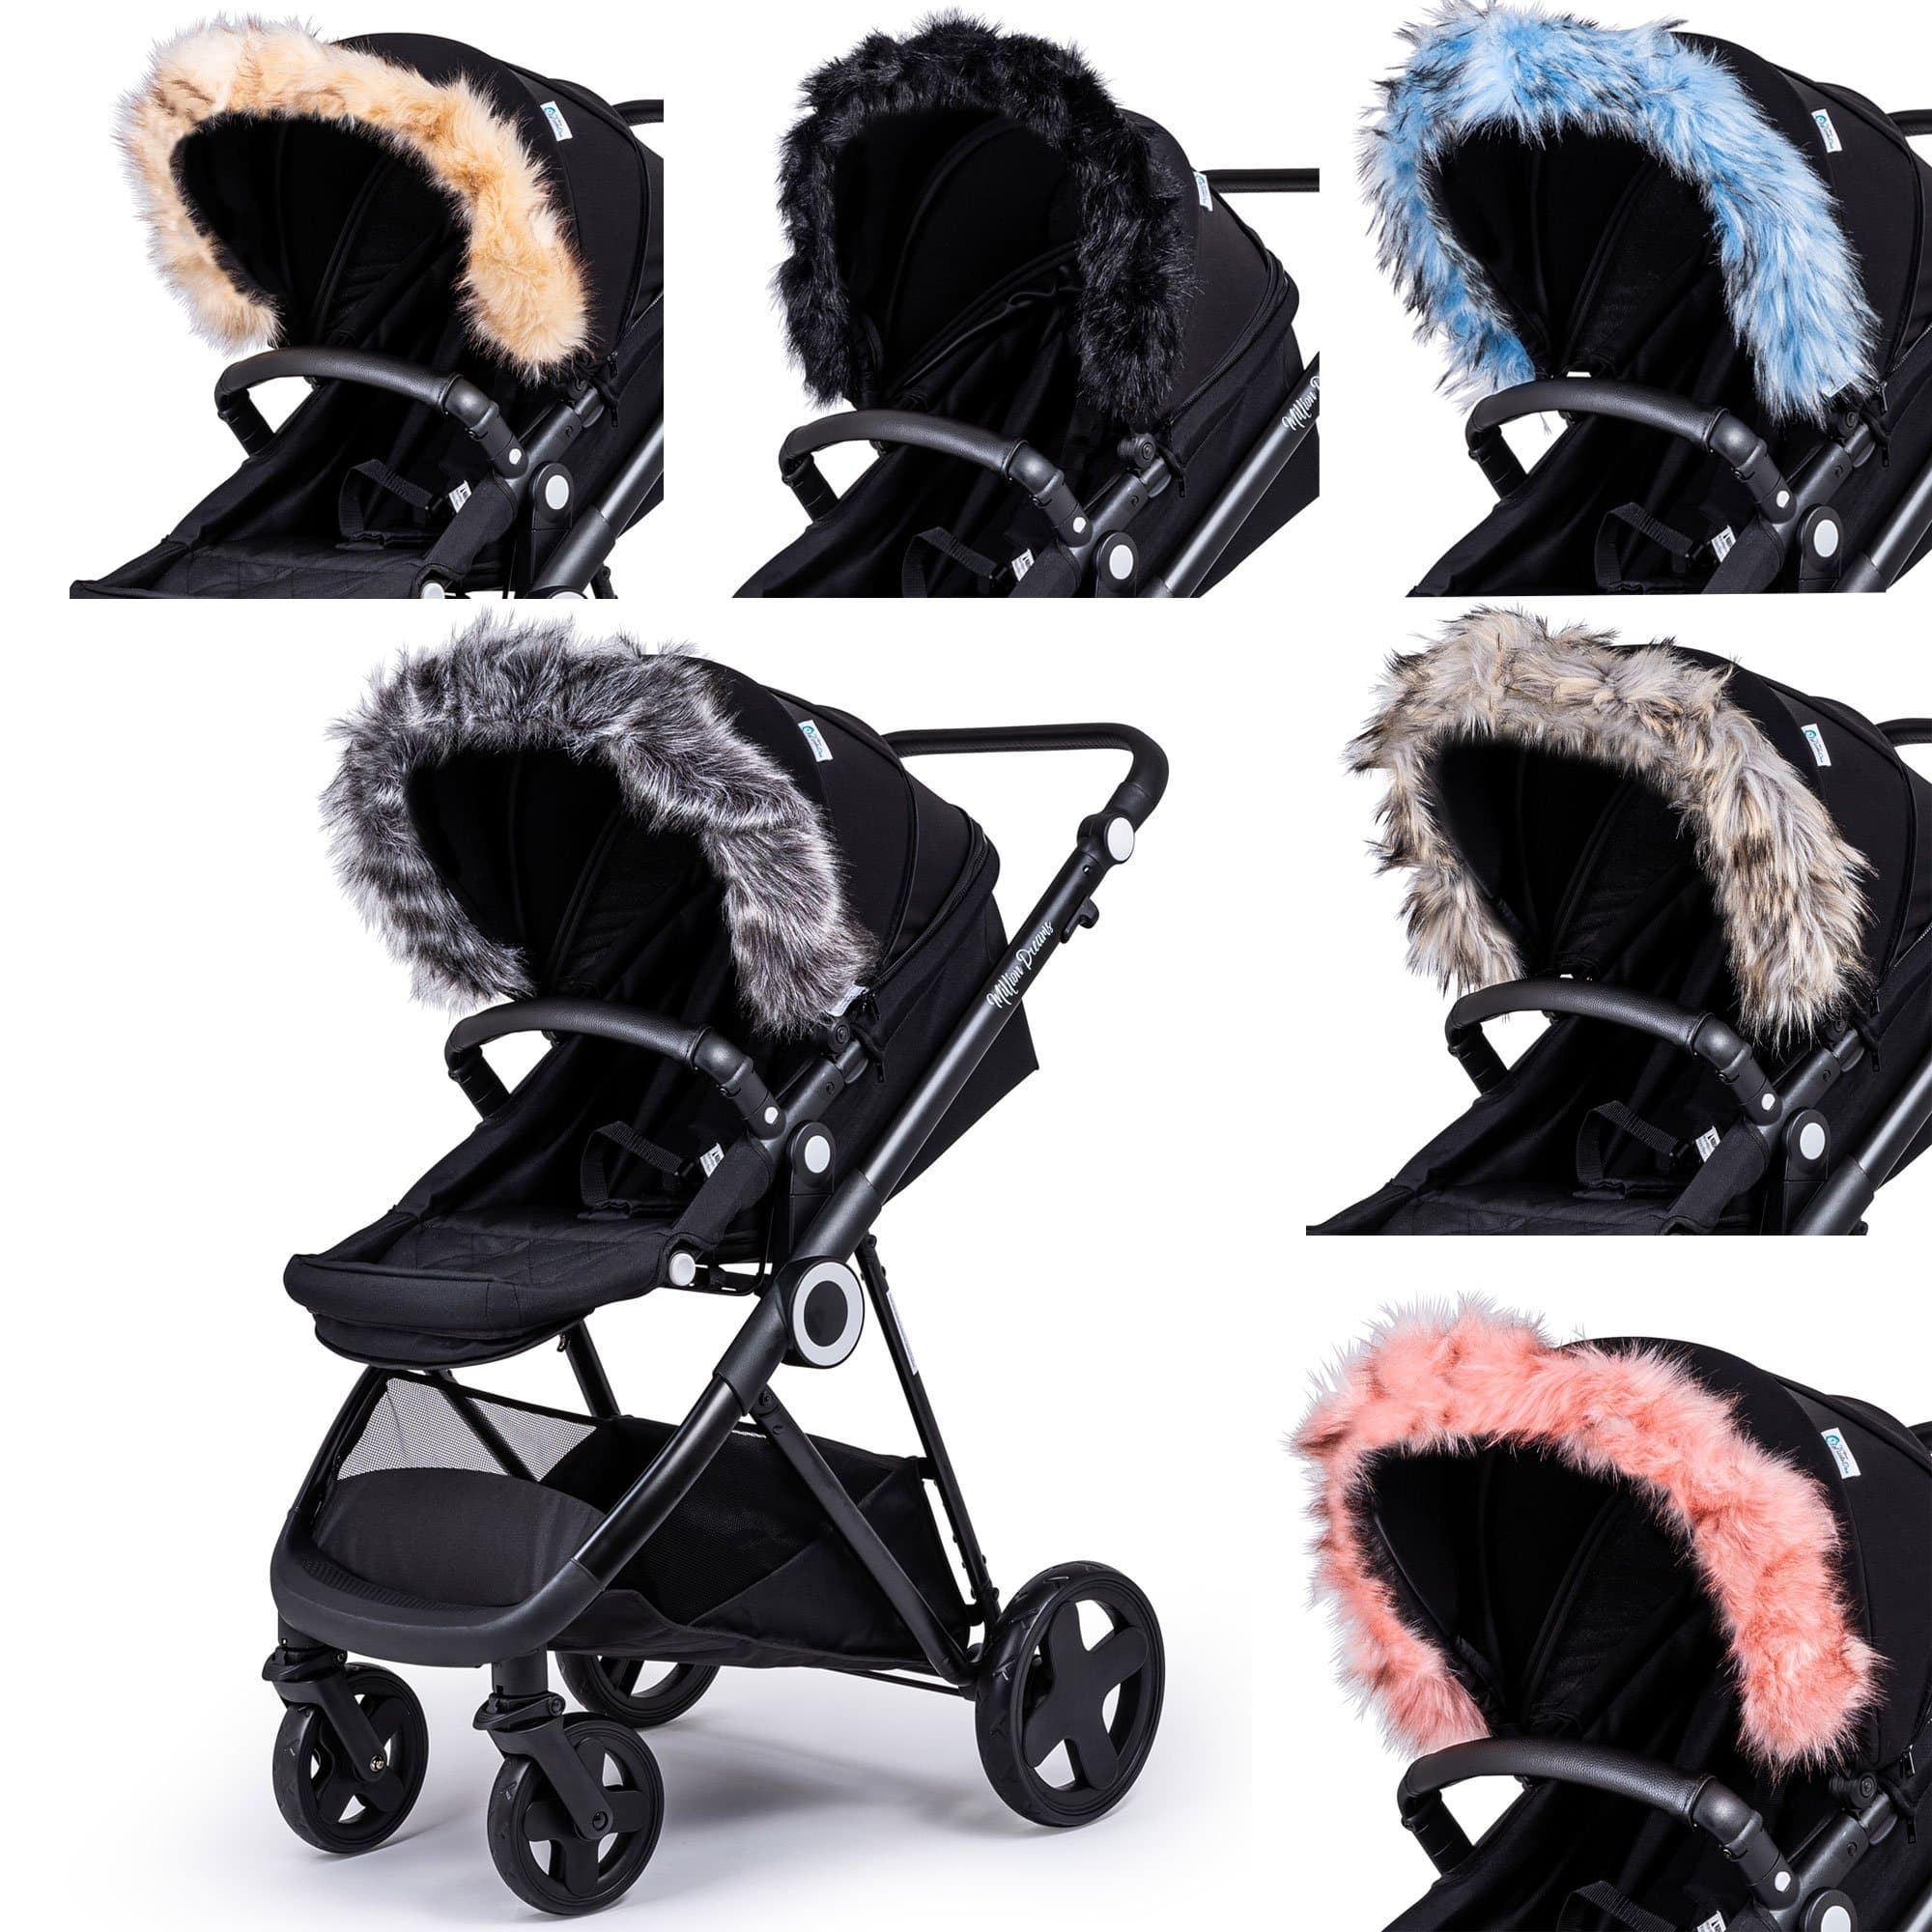 Pram Fur Hood Trim Attachment for Pushchair Compatible with Joolz - For Your Little One